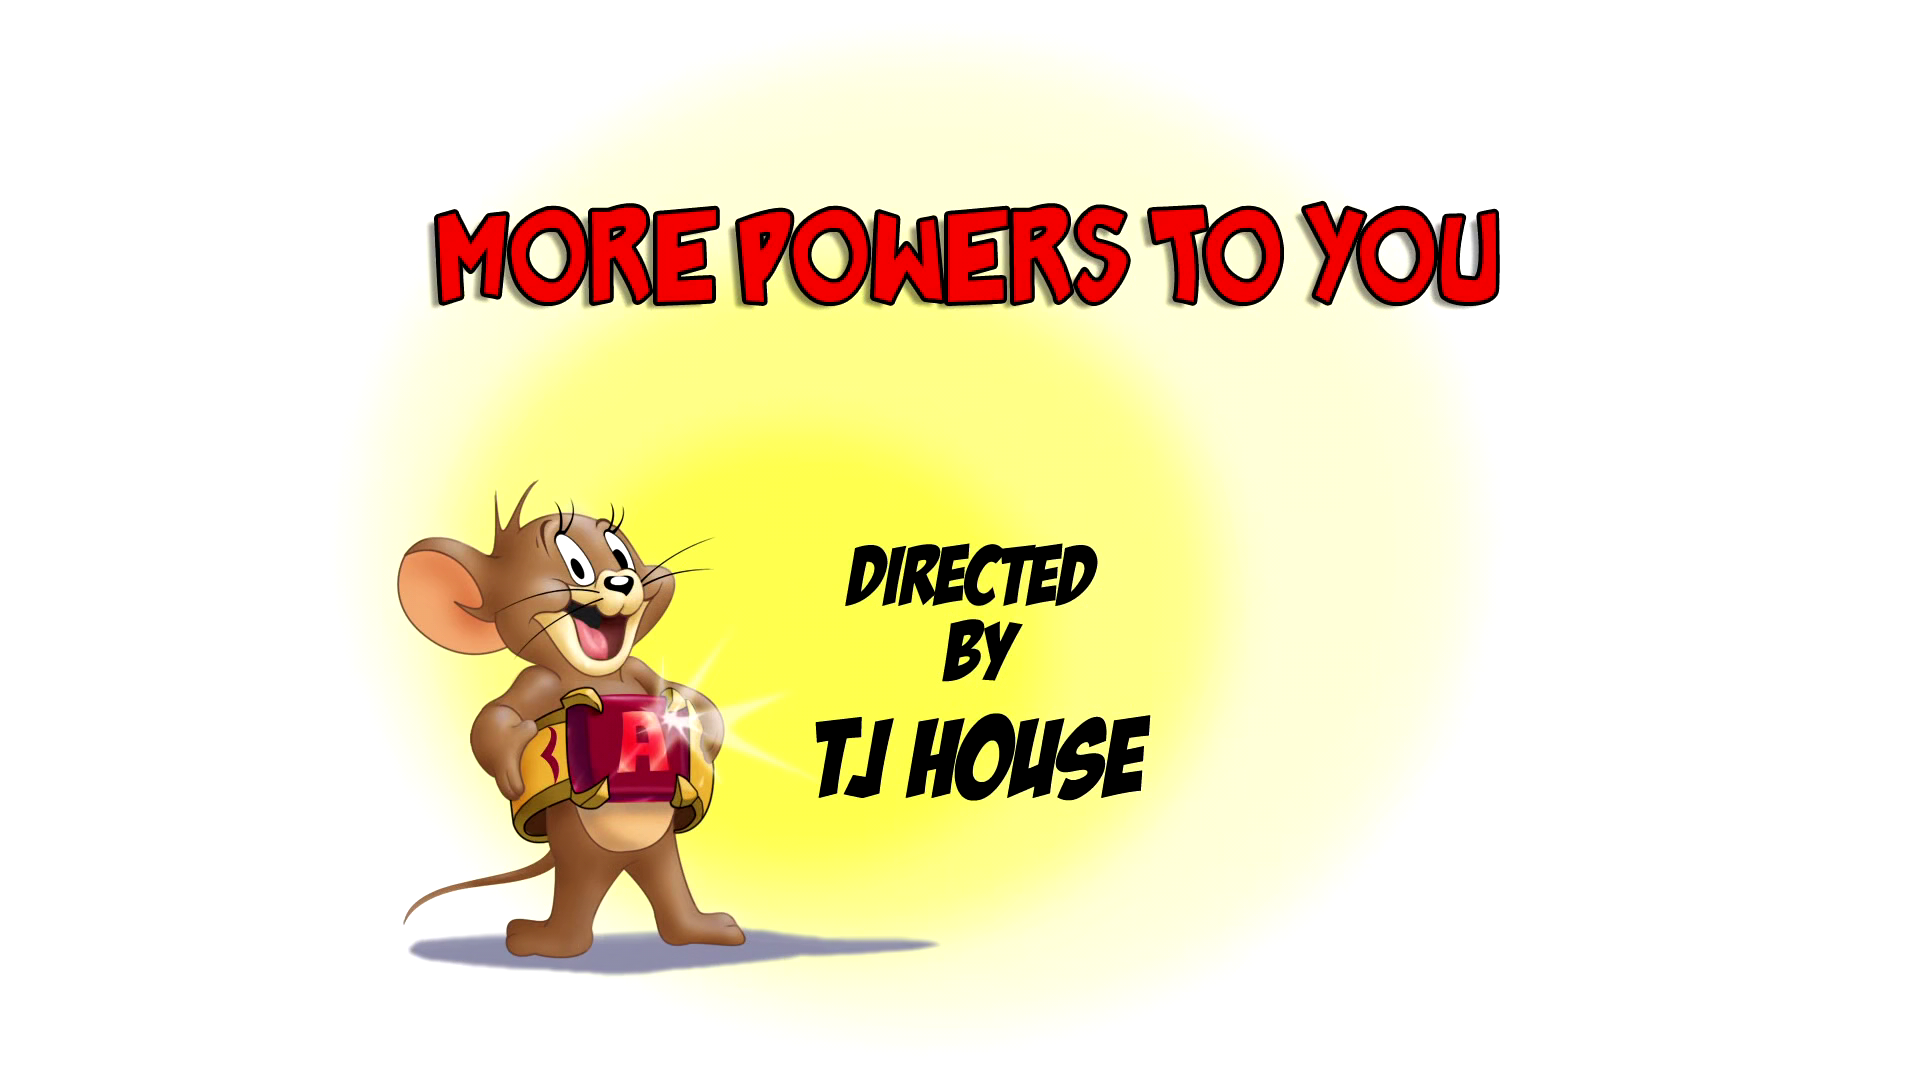 Watch Tom and Jerry Tales